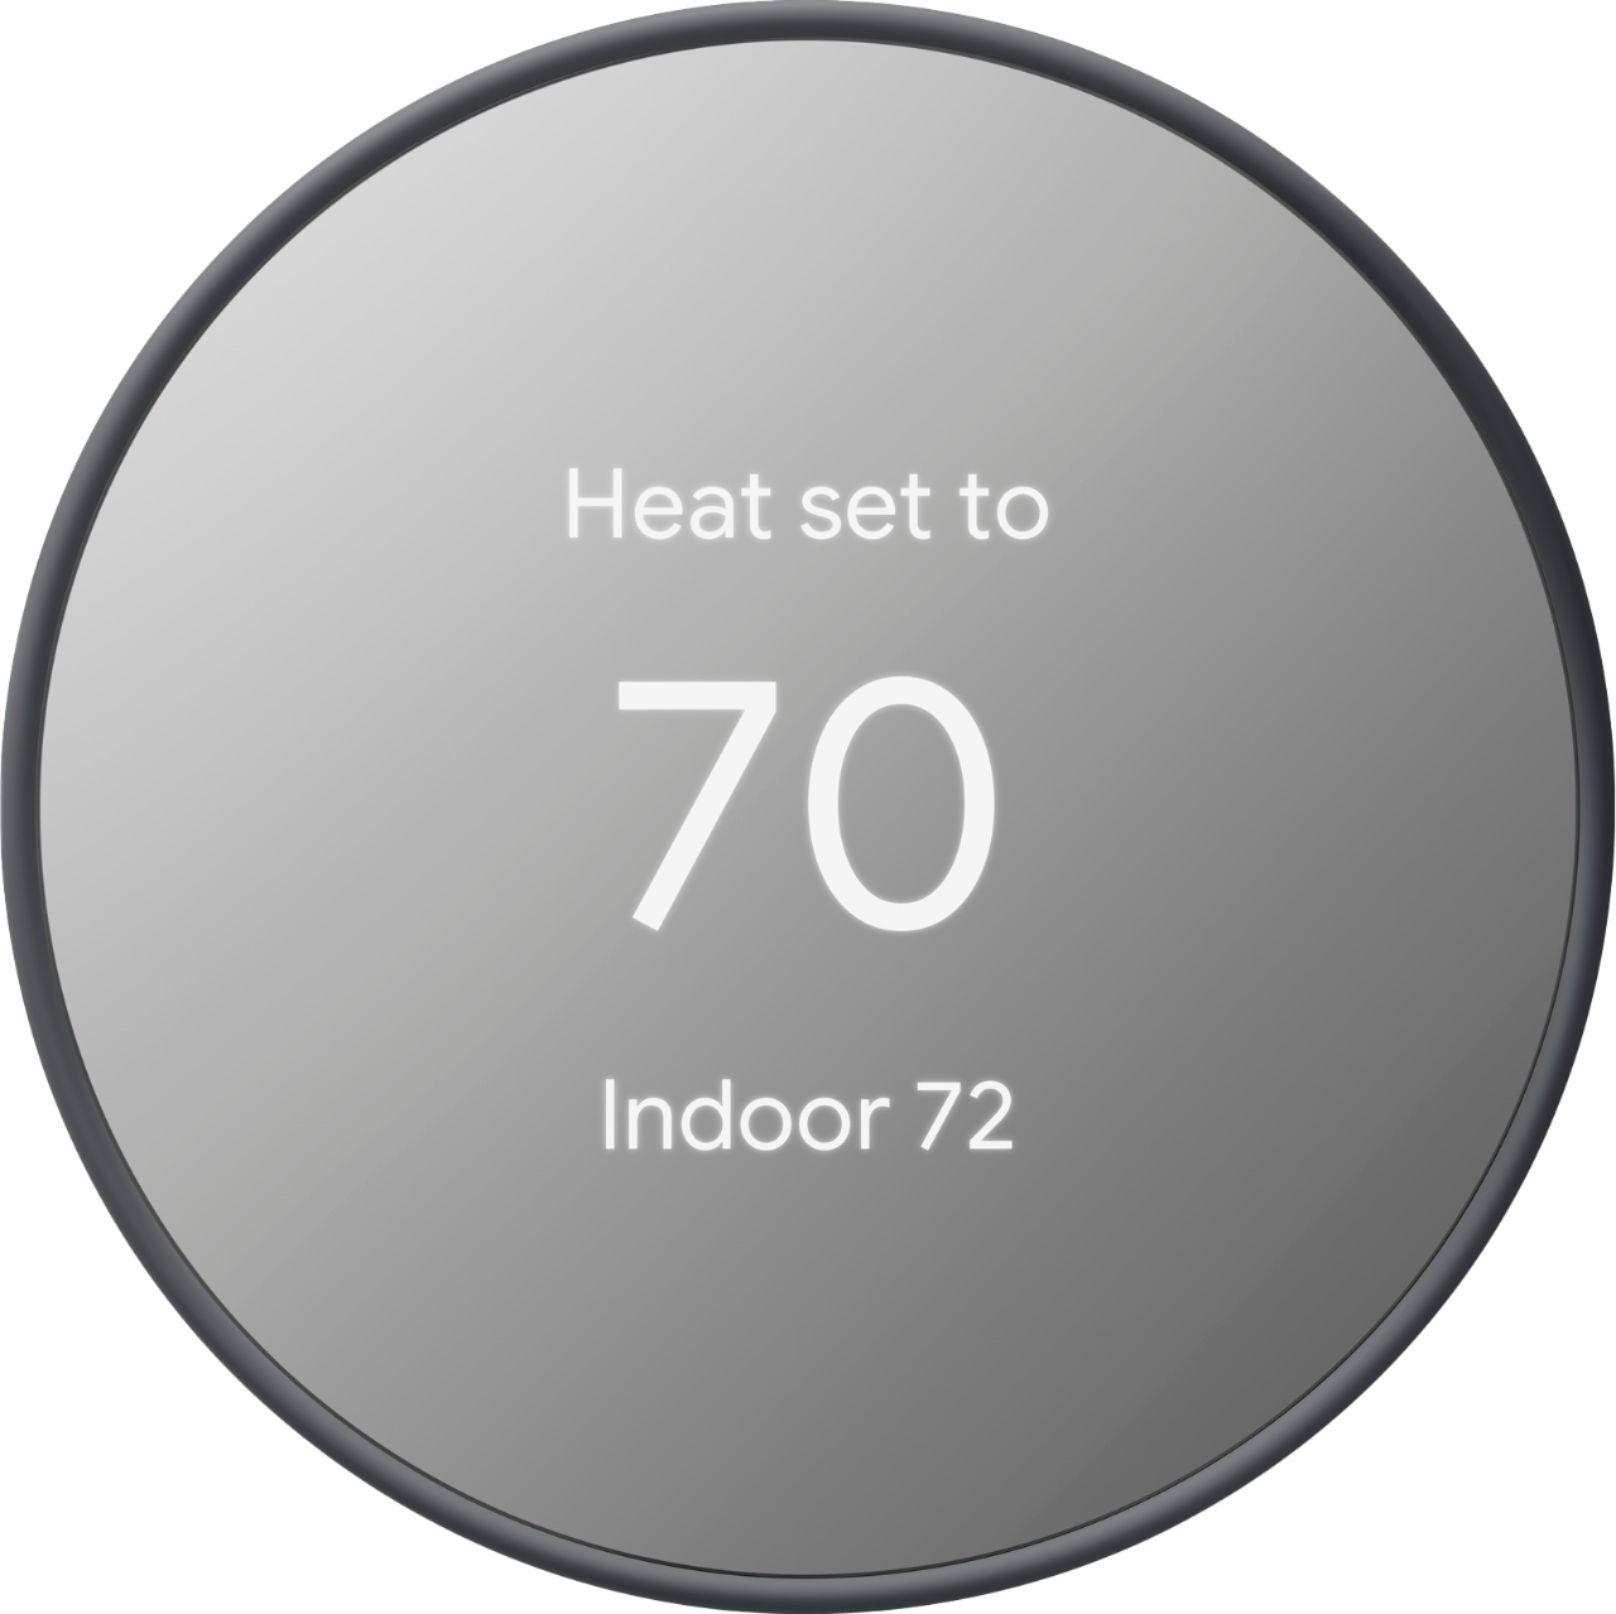 Google Nest Smart Programmable WiFi Thermostat for $59.99 Shipped